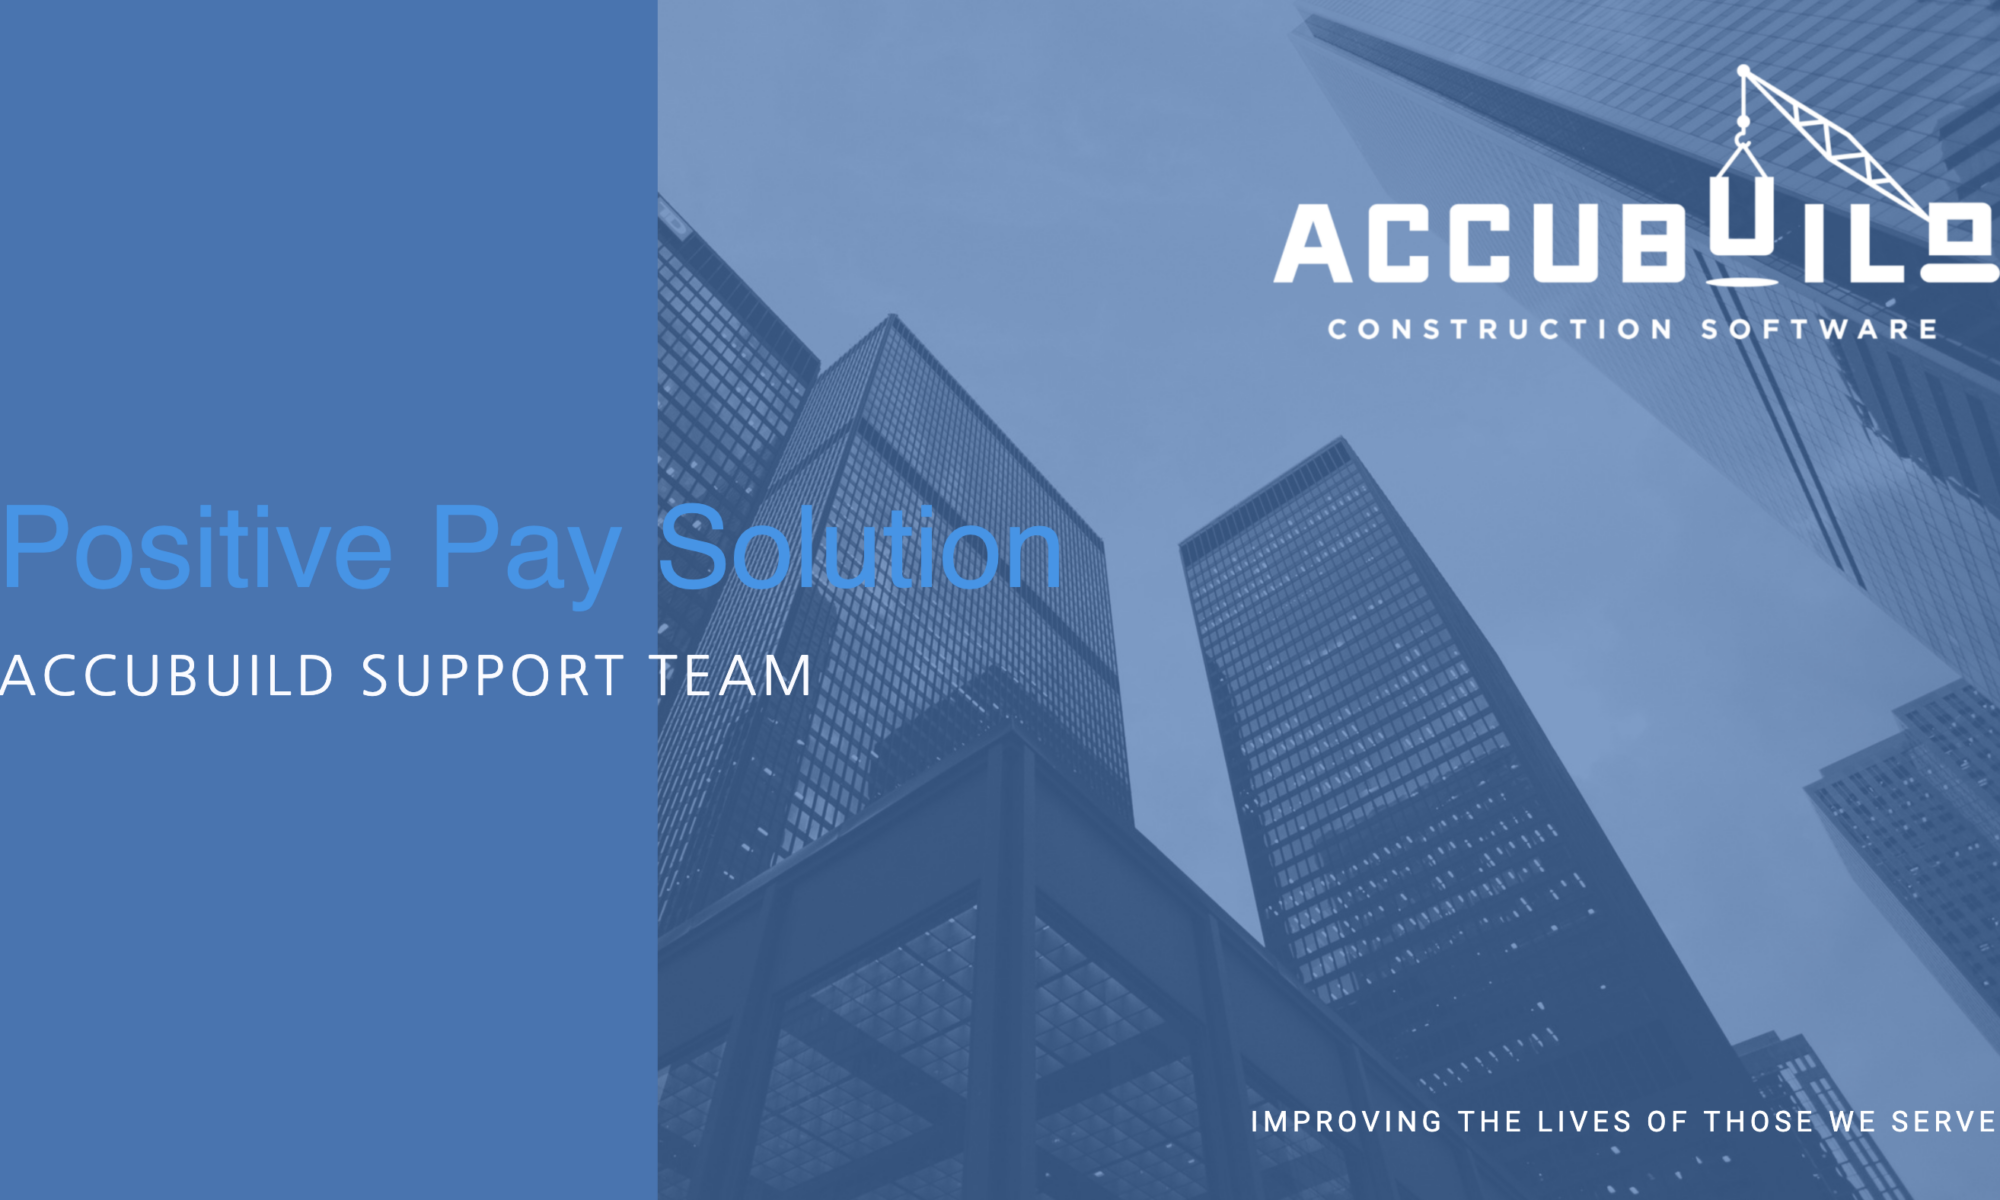 AccuBuild Solutions